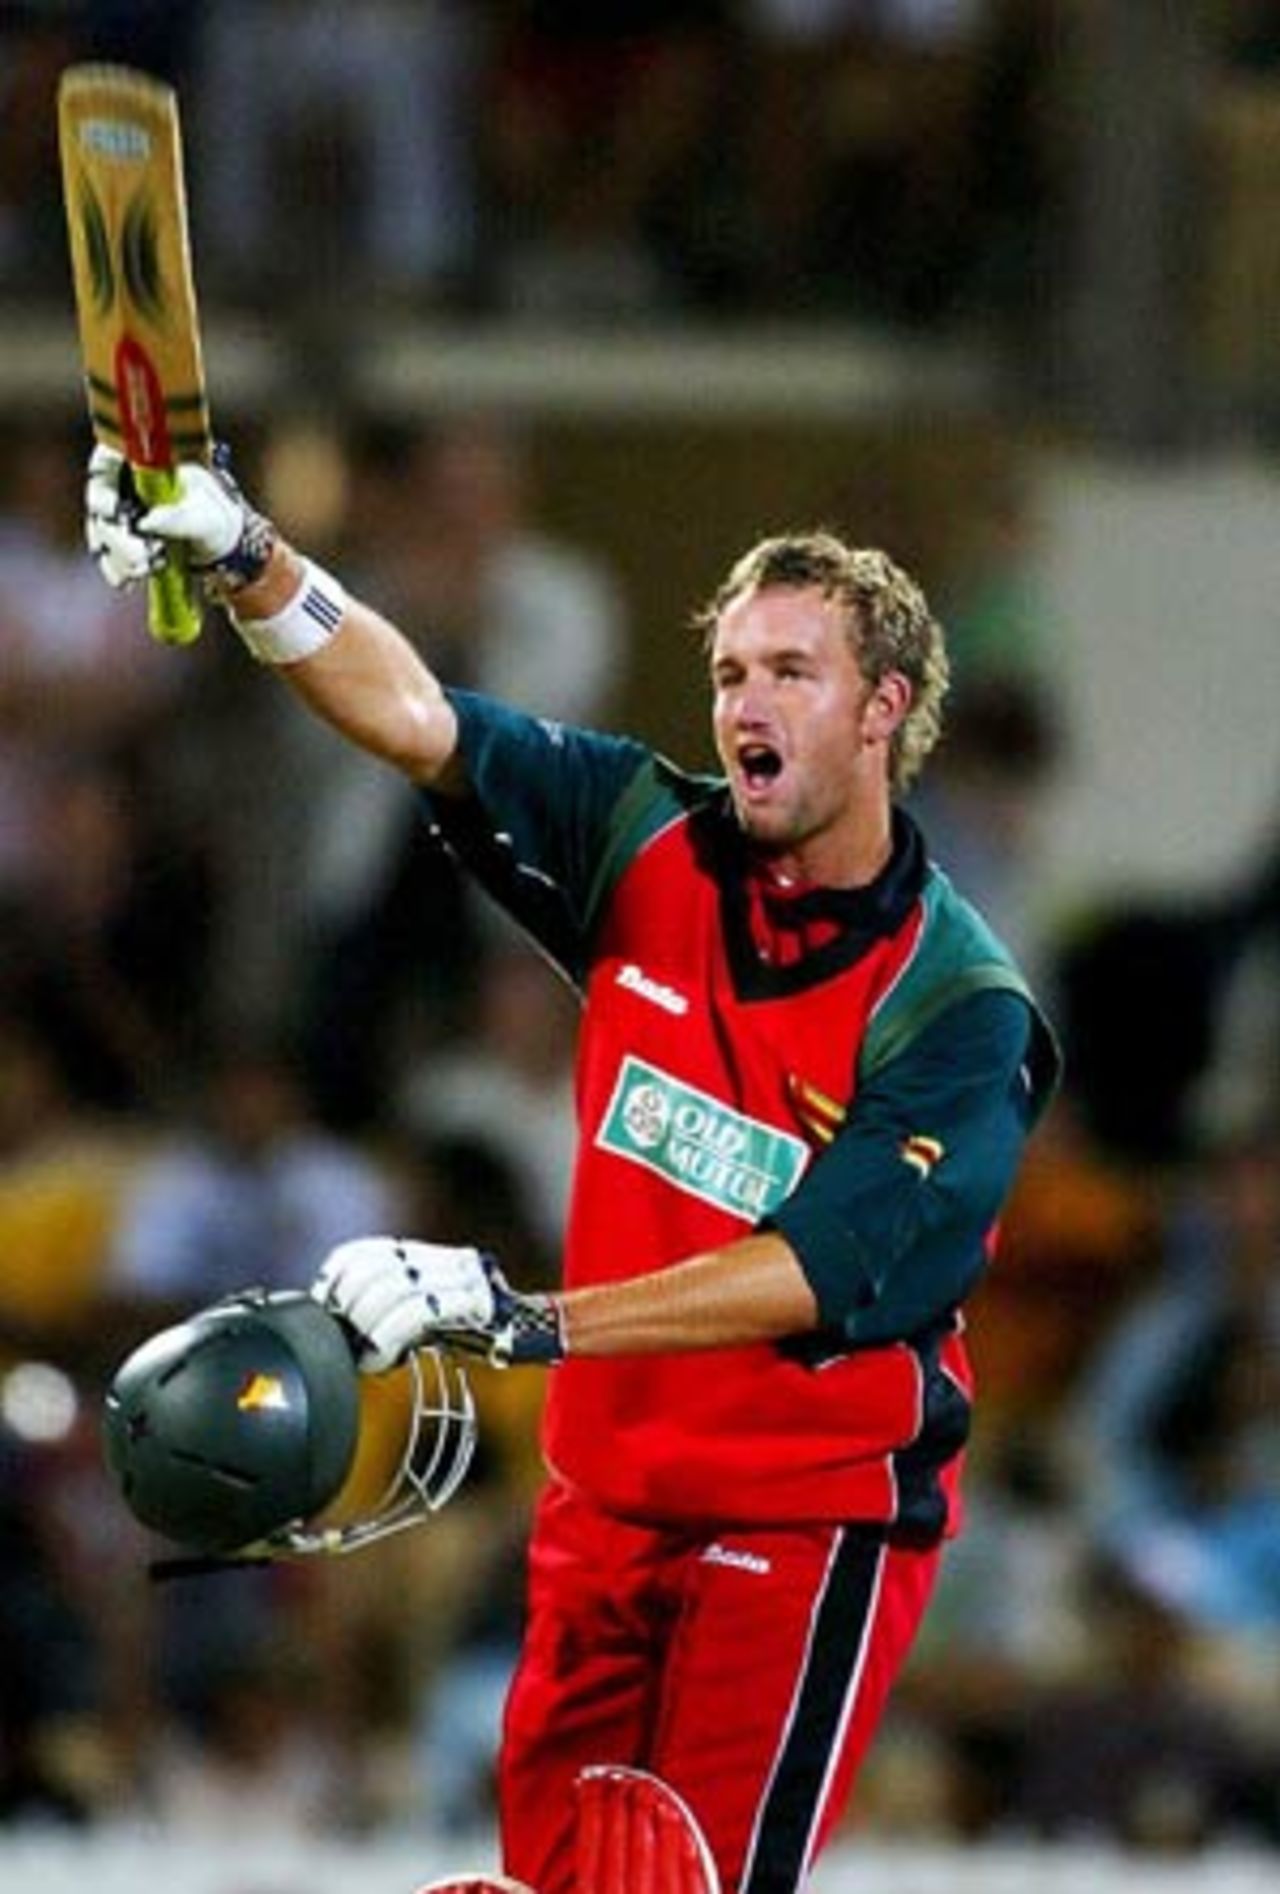 Sean Ervine's maiden century was his most important innings for Zimbabwe, India v Zimbabwe, VB Series, 8th ODI, Adelaide, January 24, 2004